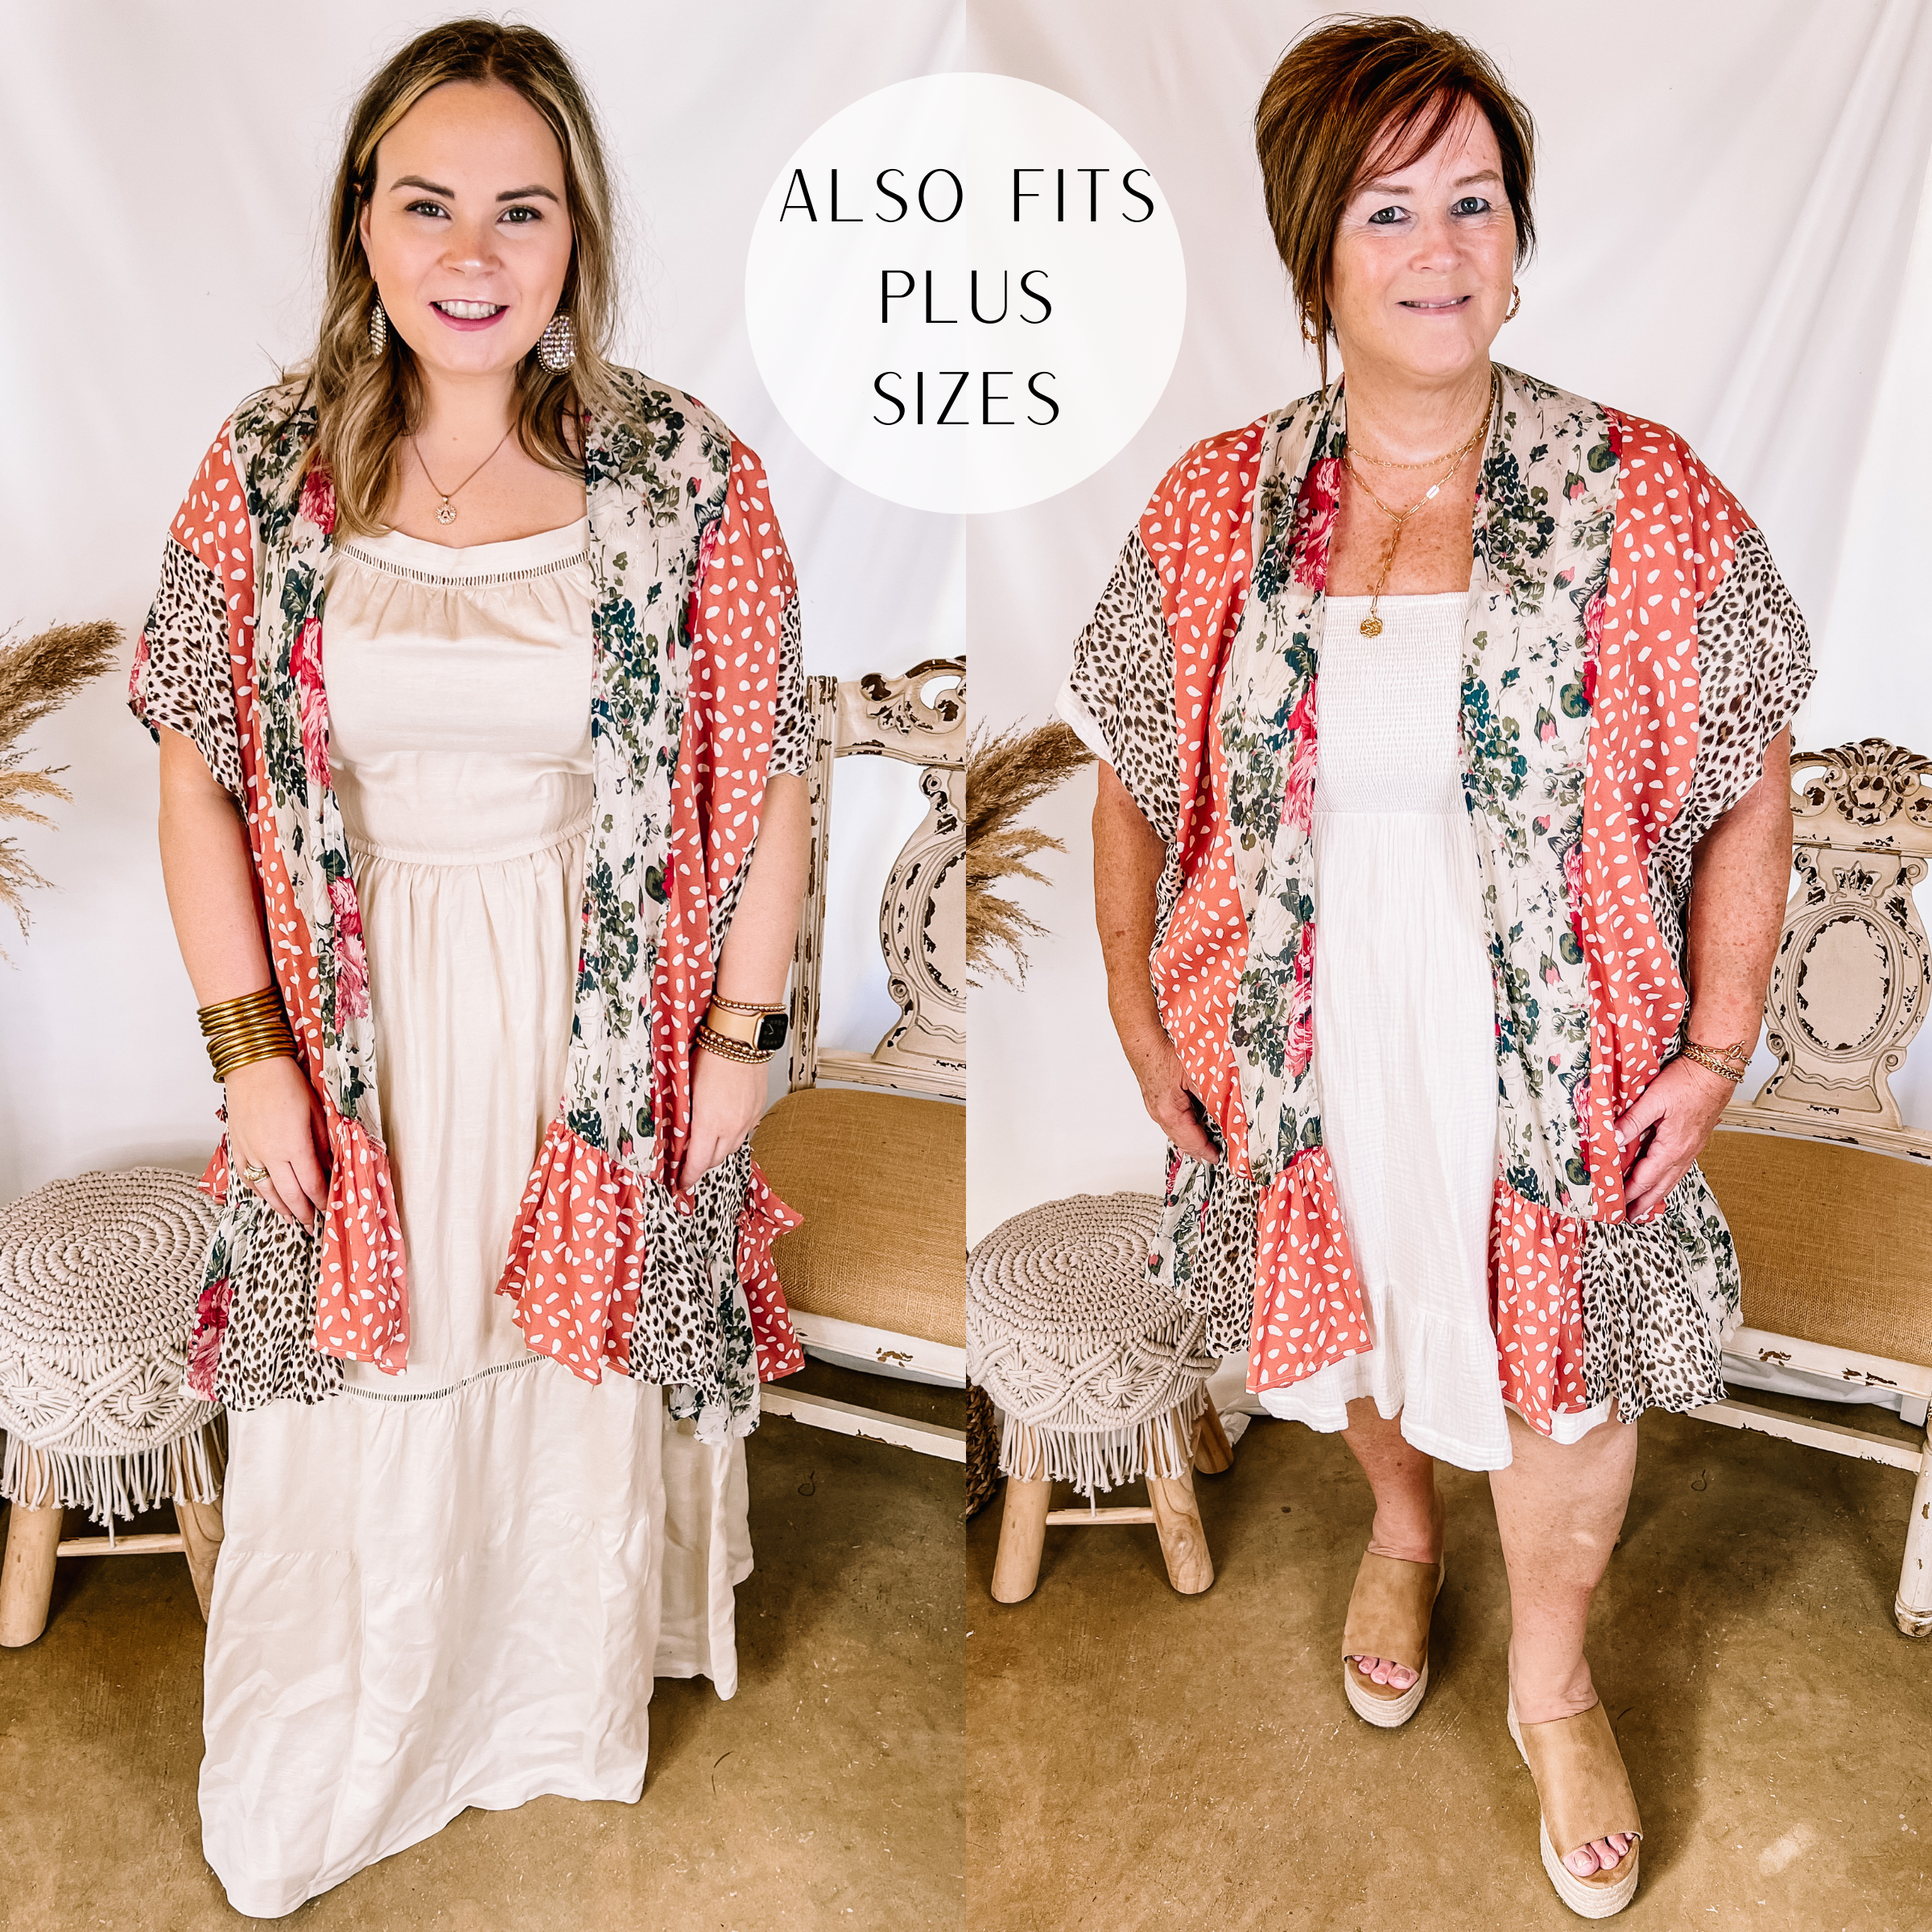 Models are wearing a floral and animal print mix kimono. Size large model has it on over an ivory maxi dress. Plus size model has it on over a white dress with tan wedges and gold jewelry.